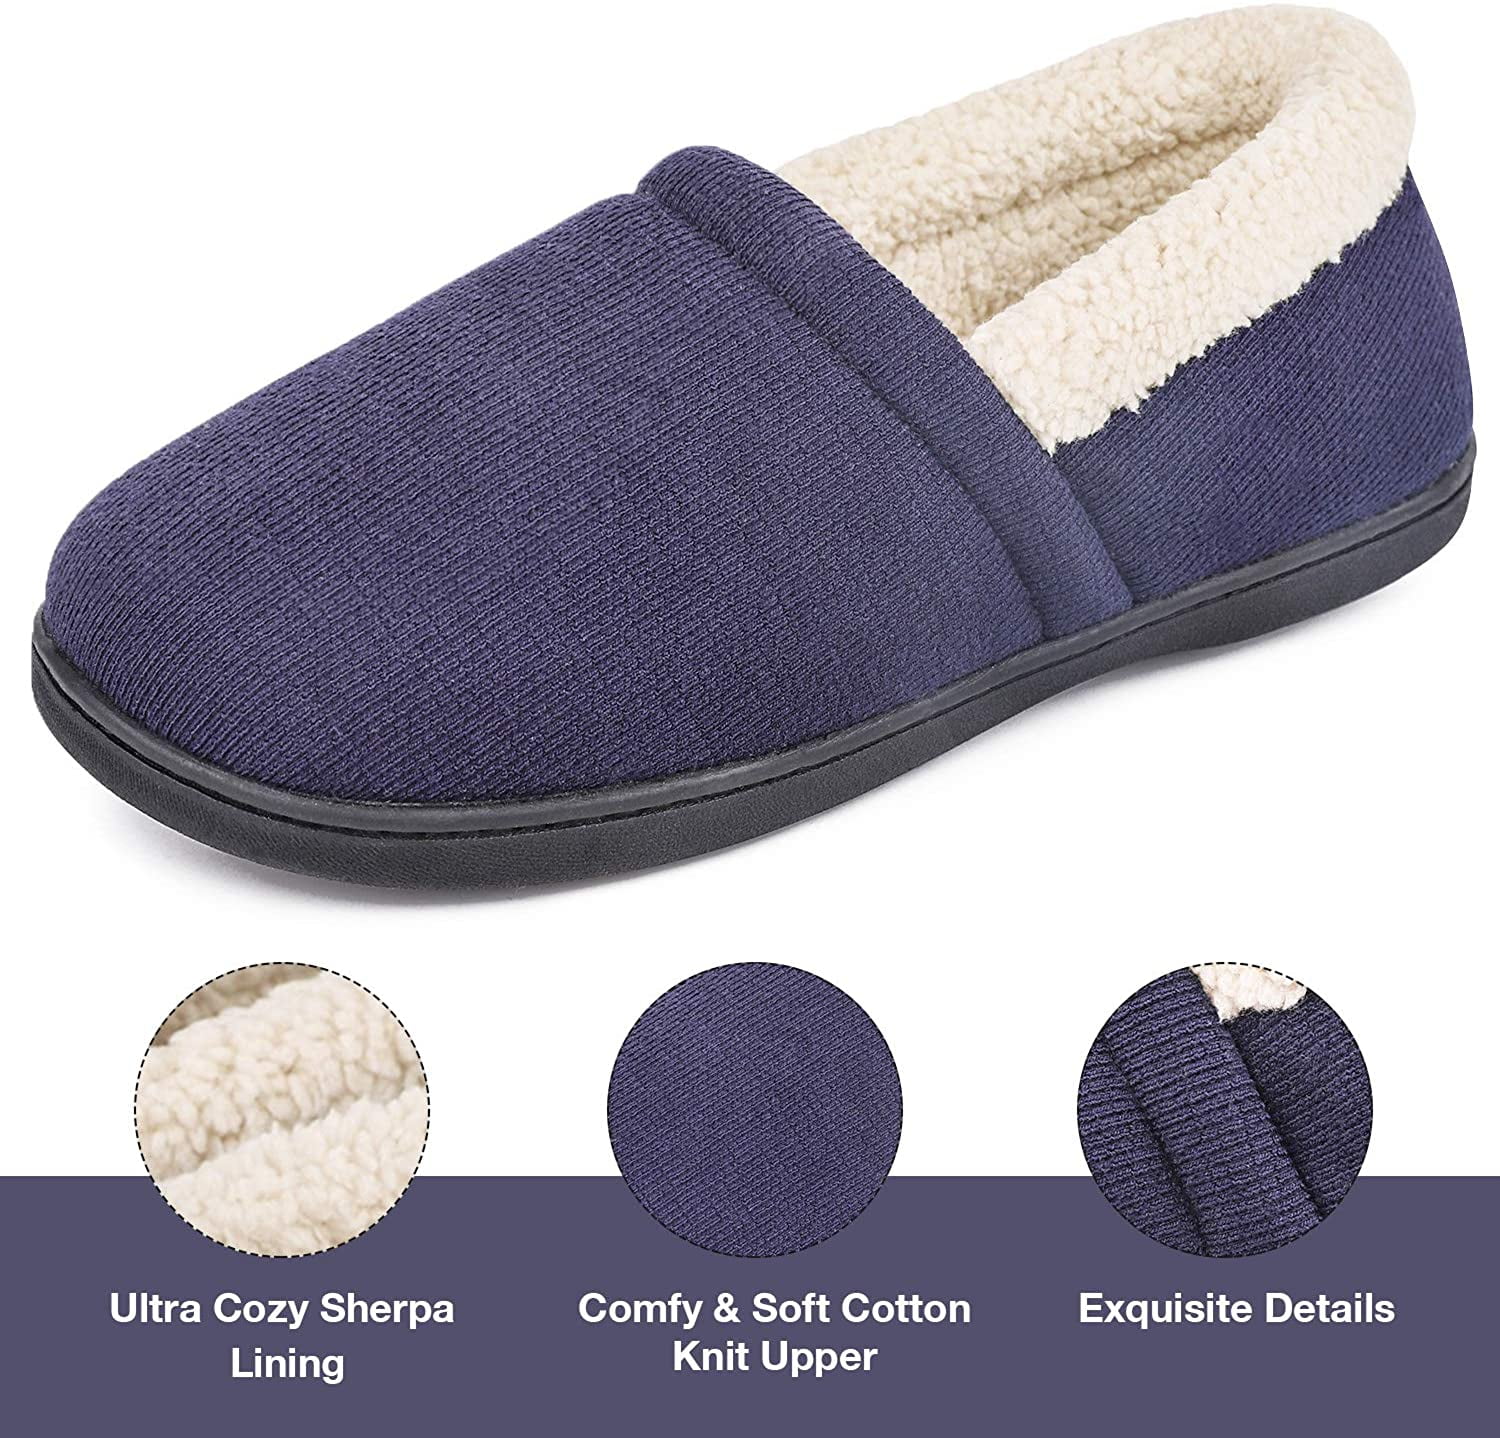 Men’s Comfy Fuzzy Knit Cotton Memory Foam House Shoes Slippers w/Indoor Outdoor 